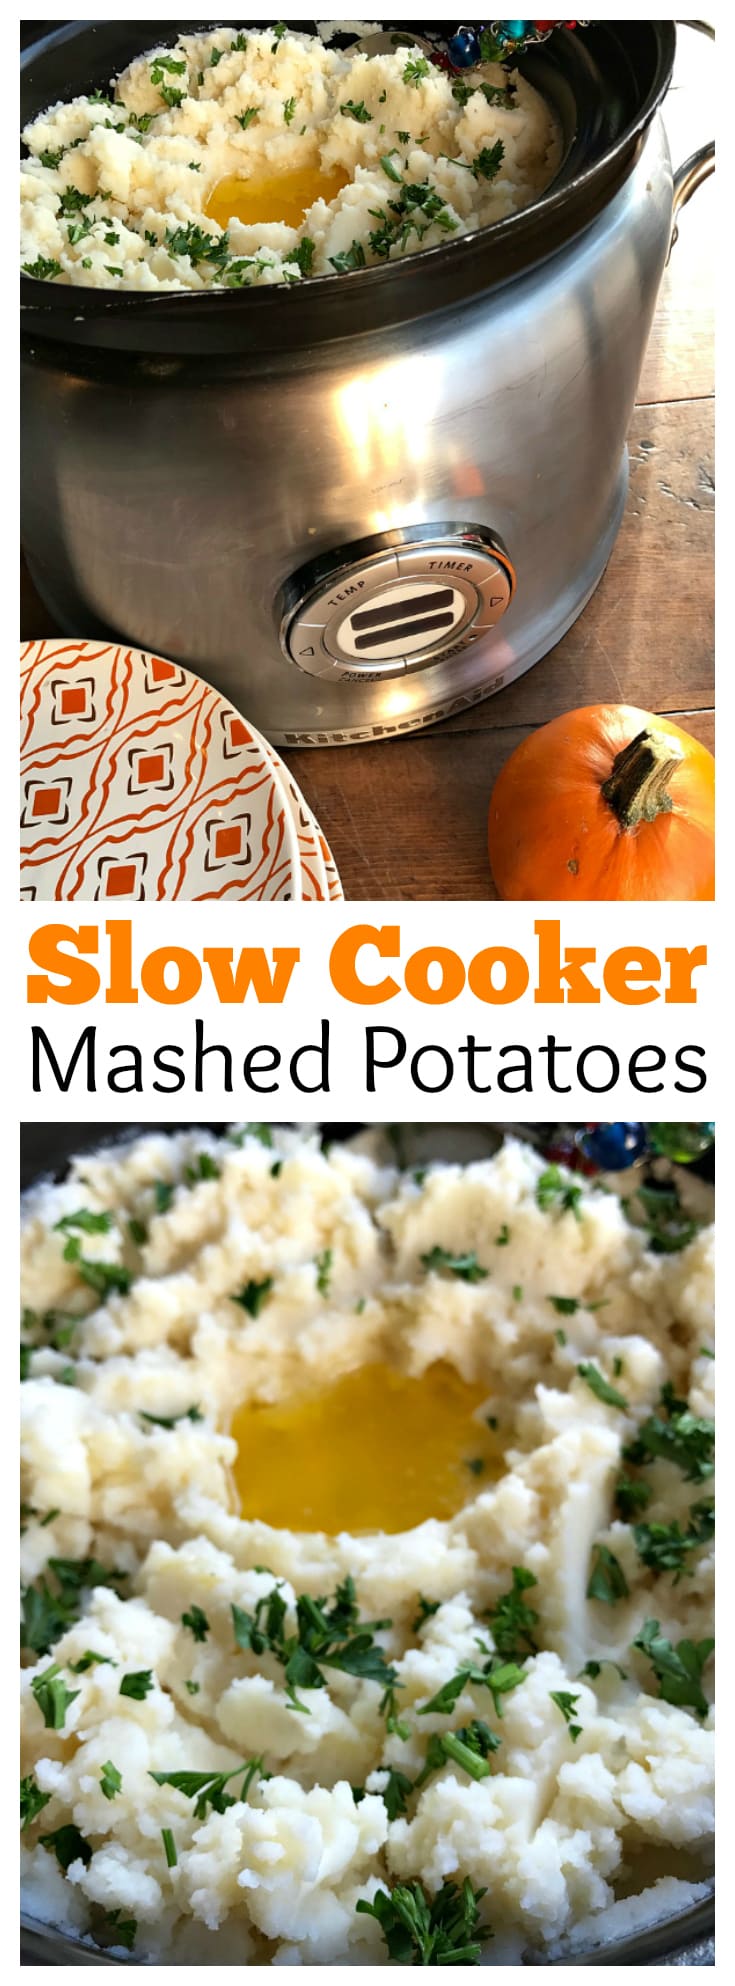 Slow Cooker Mashed Potatoes at ReluctantEntertainer.com